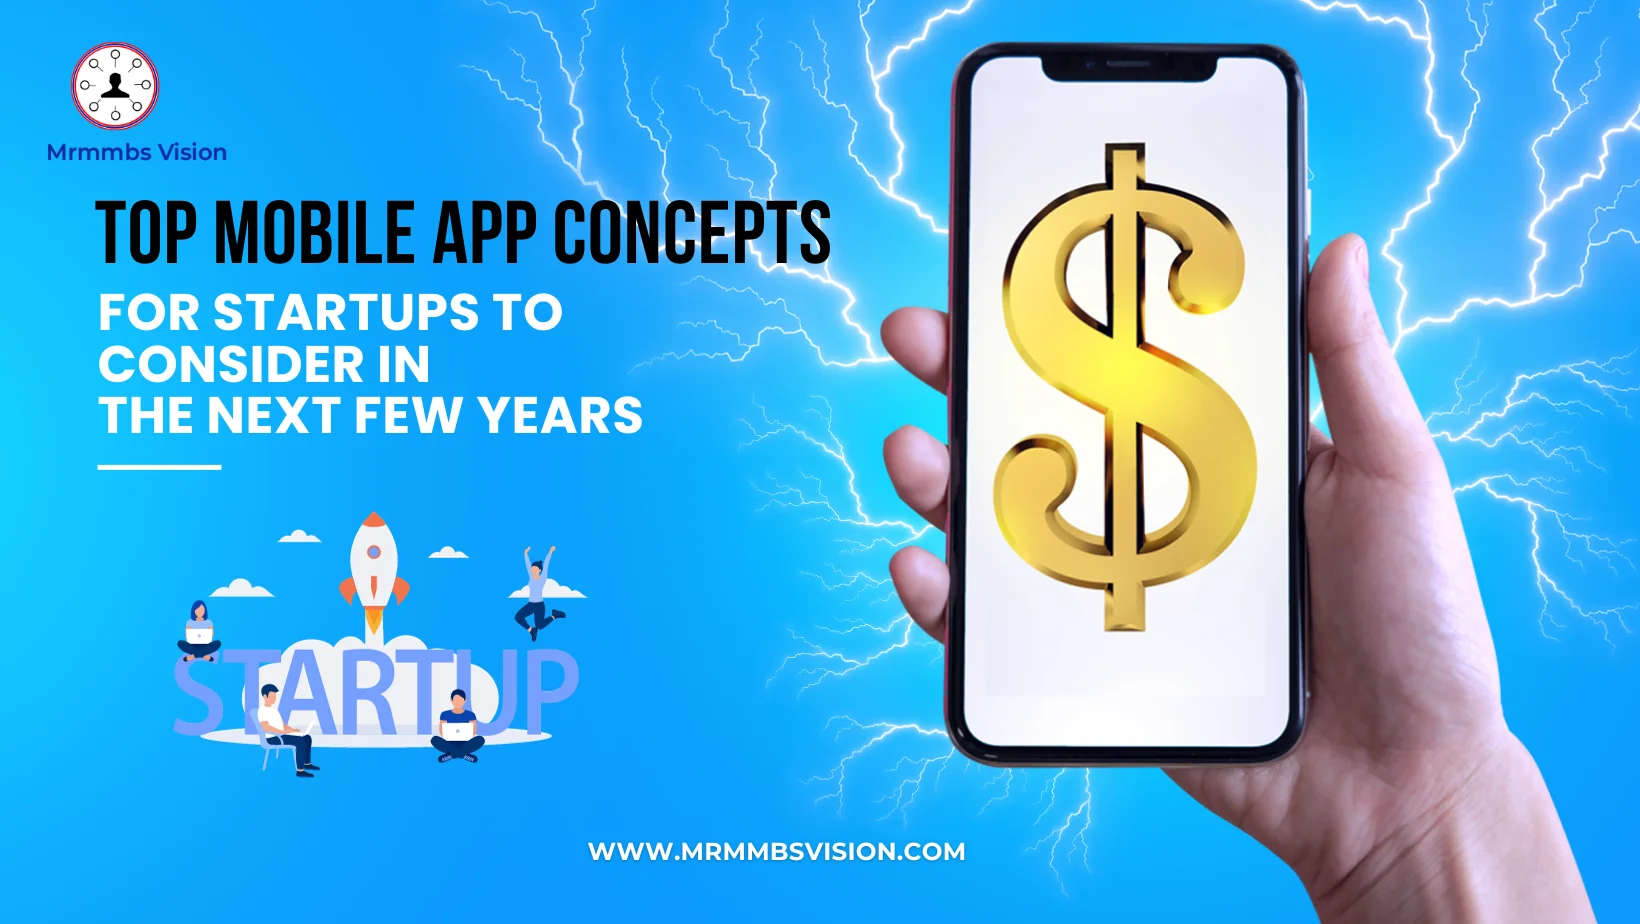 Top Mobile App Concepts for Startups to Consider in the Next Few Years            